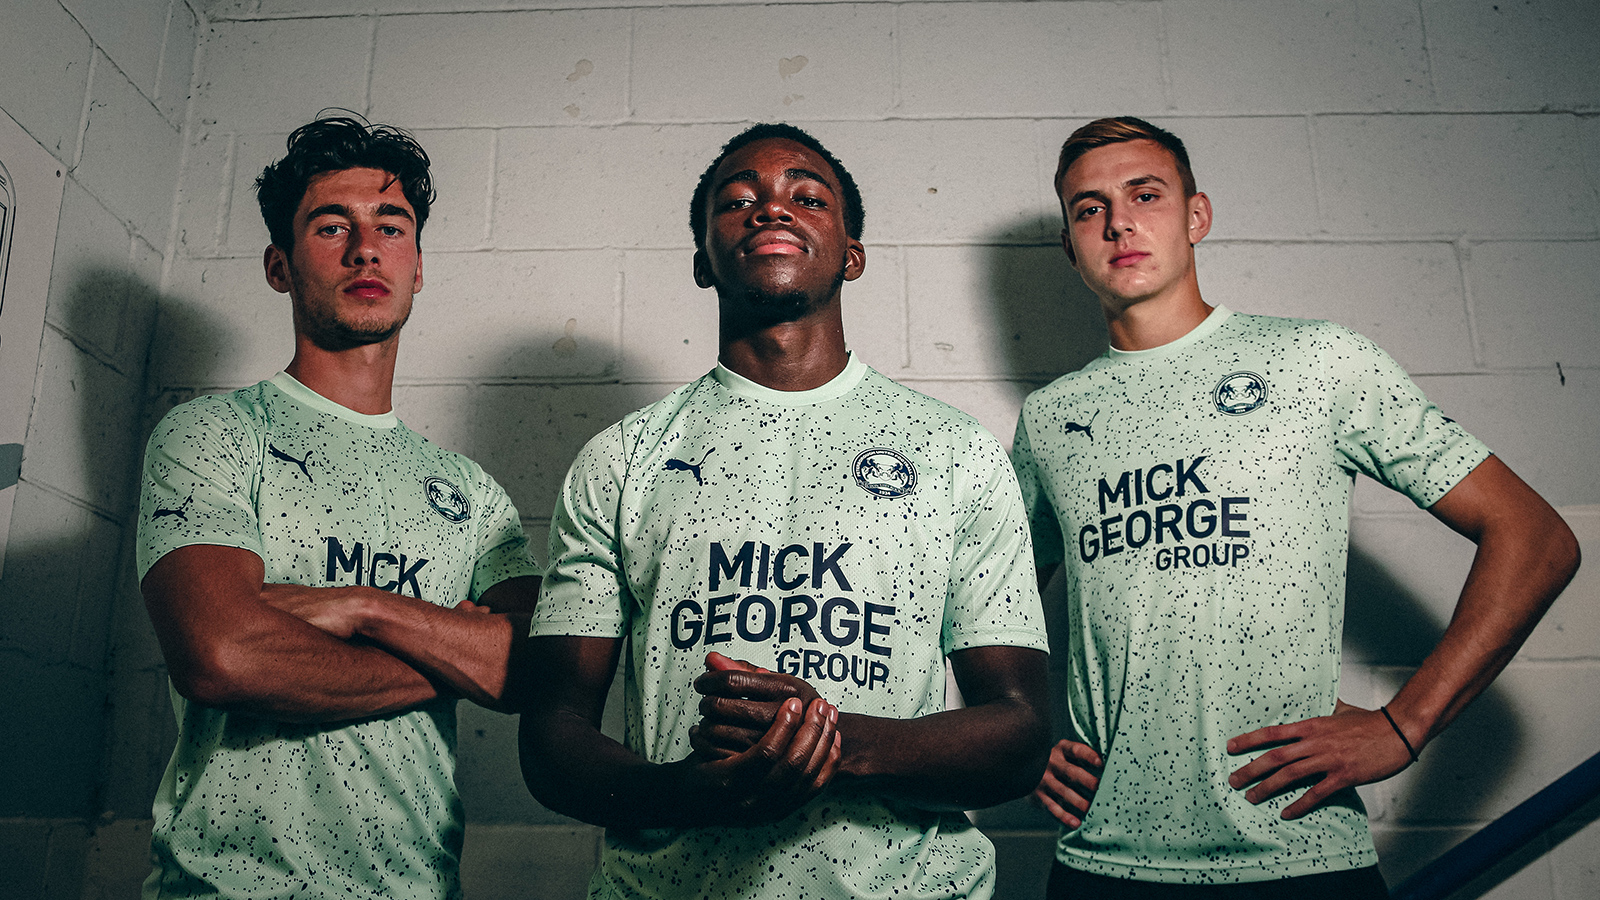 Our New Away Kit